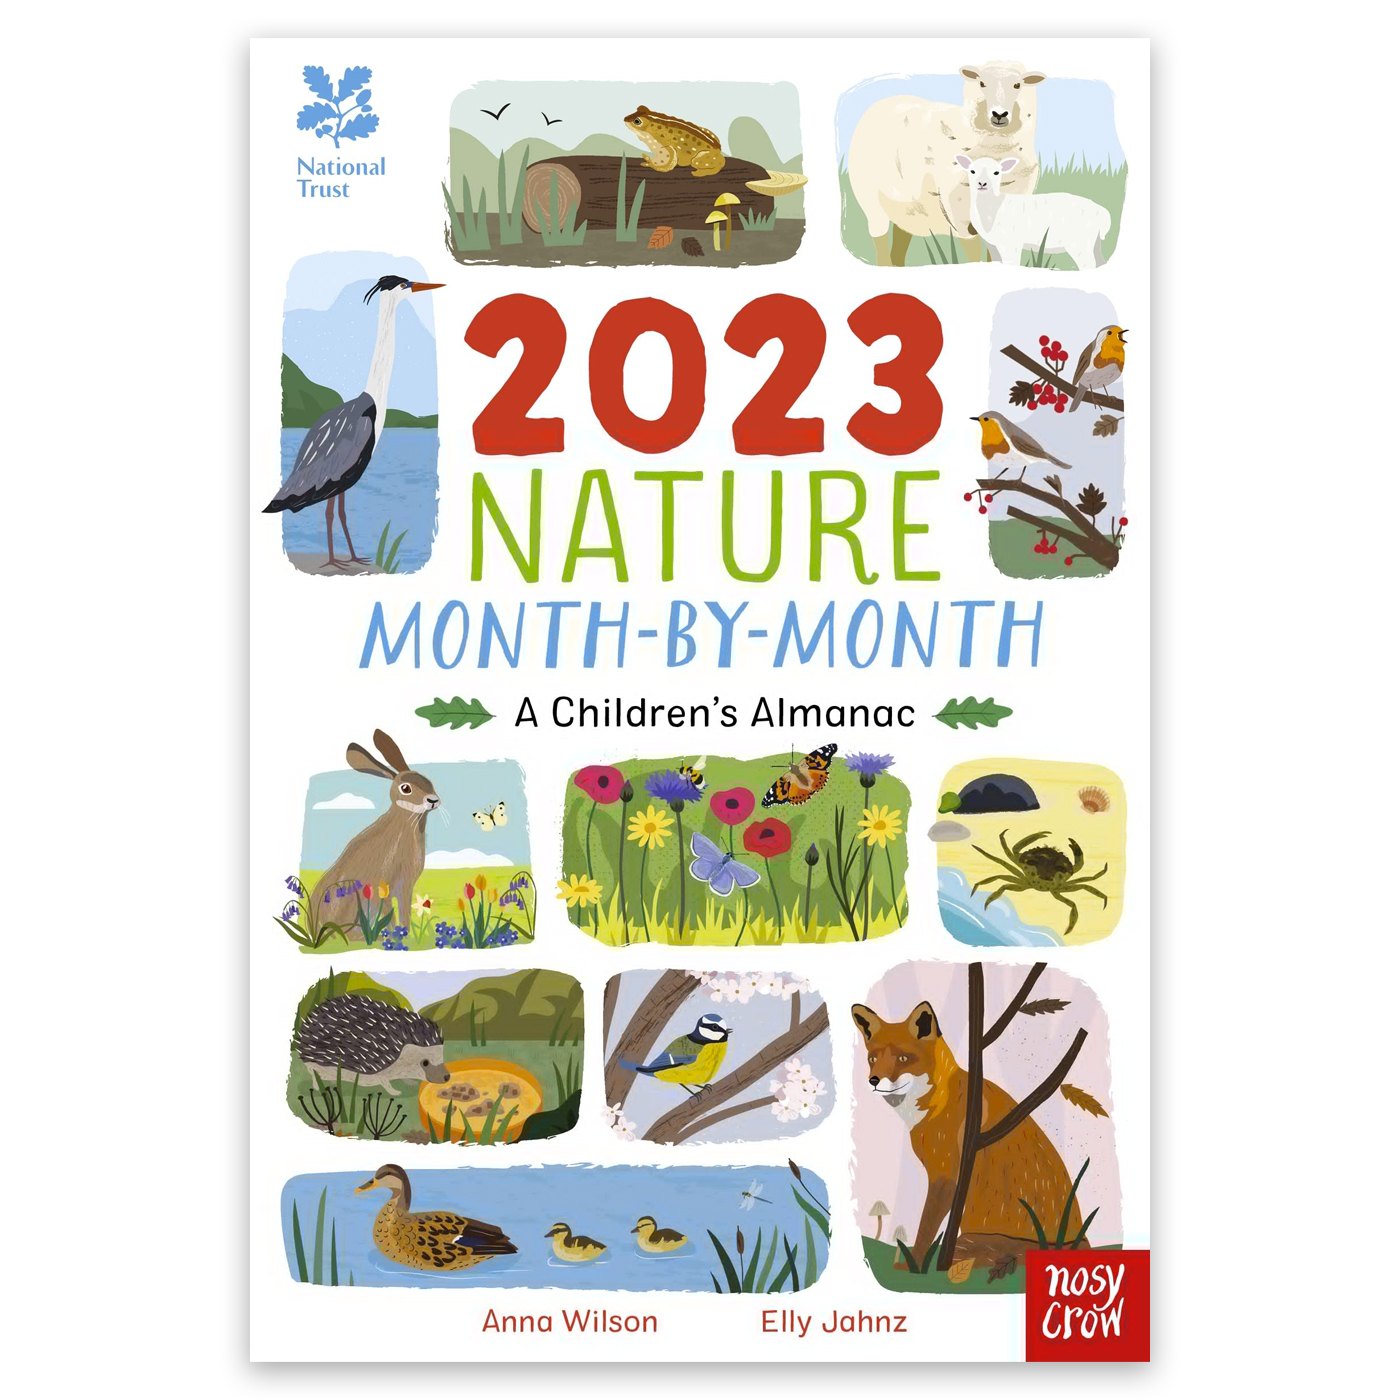  National Trust: 2023 Nature Month-By-Month: A Children’s Almanac